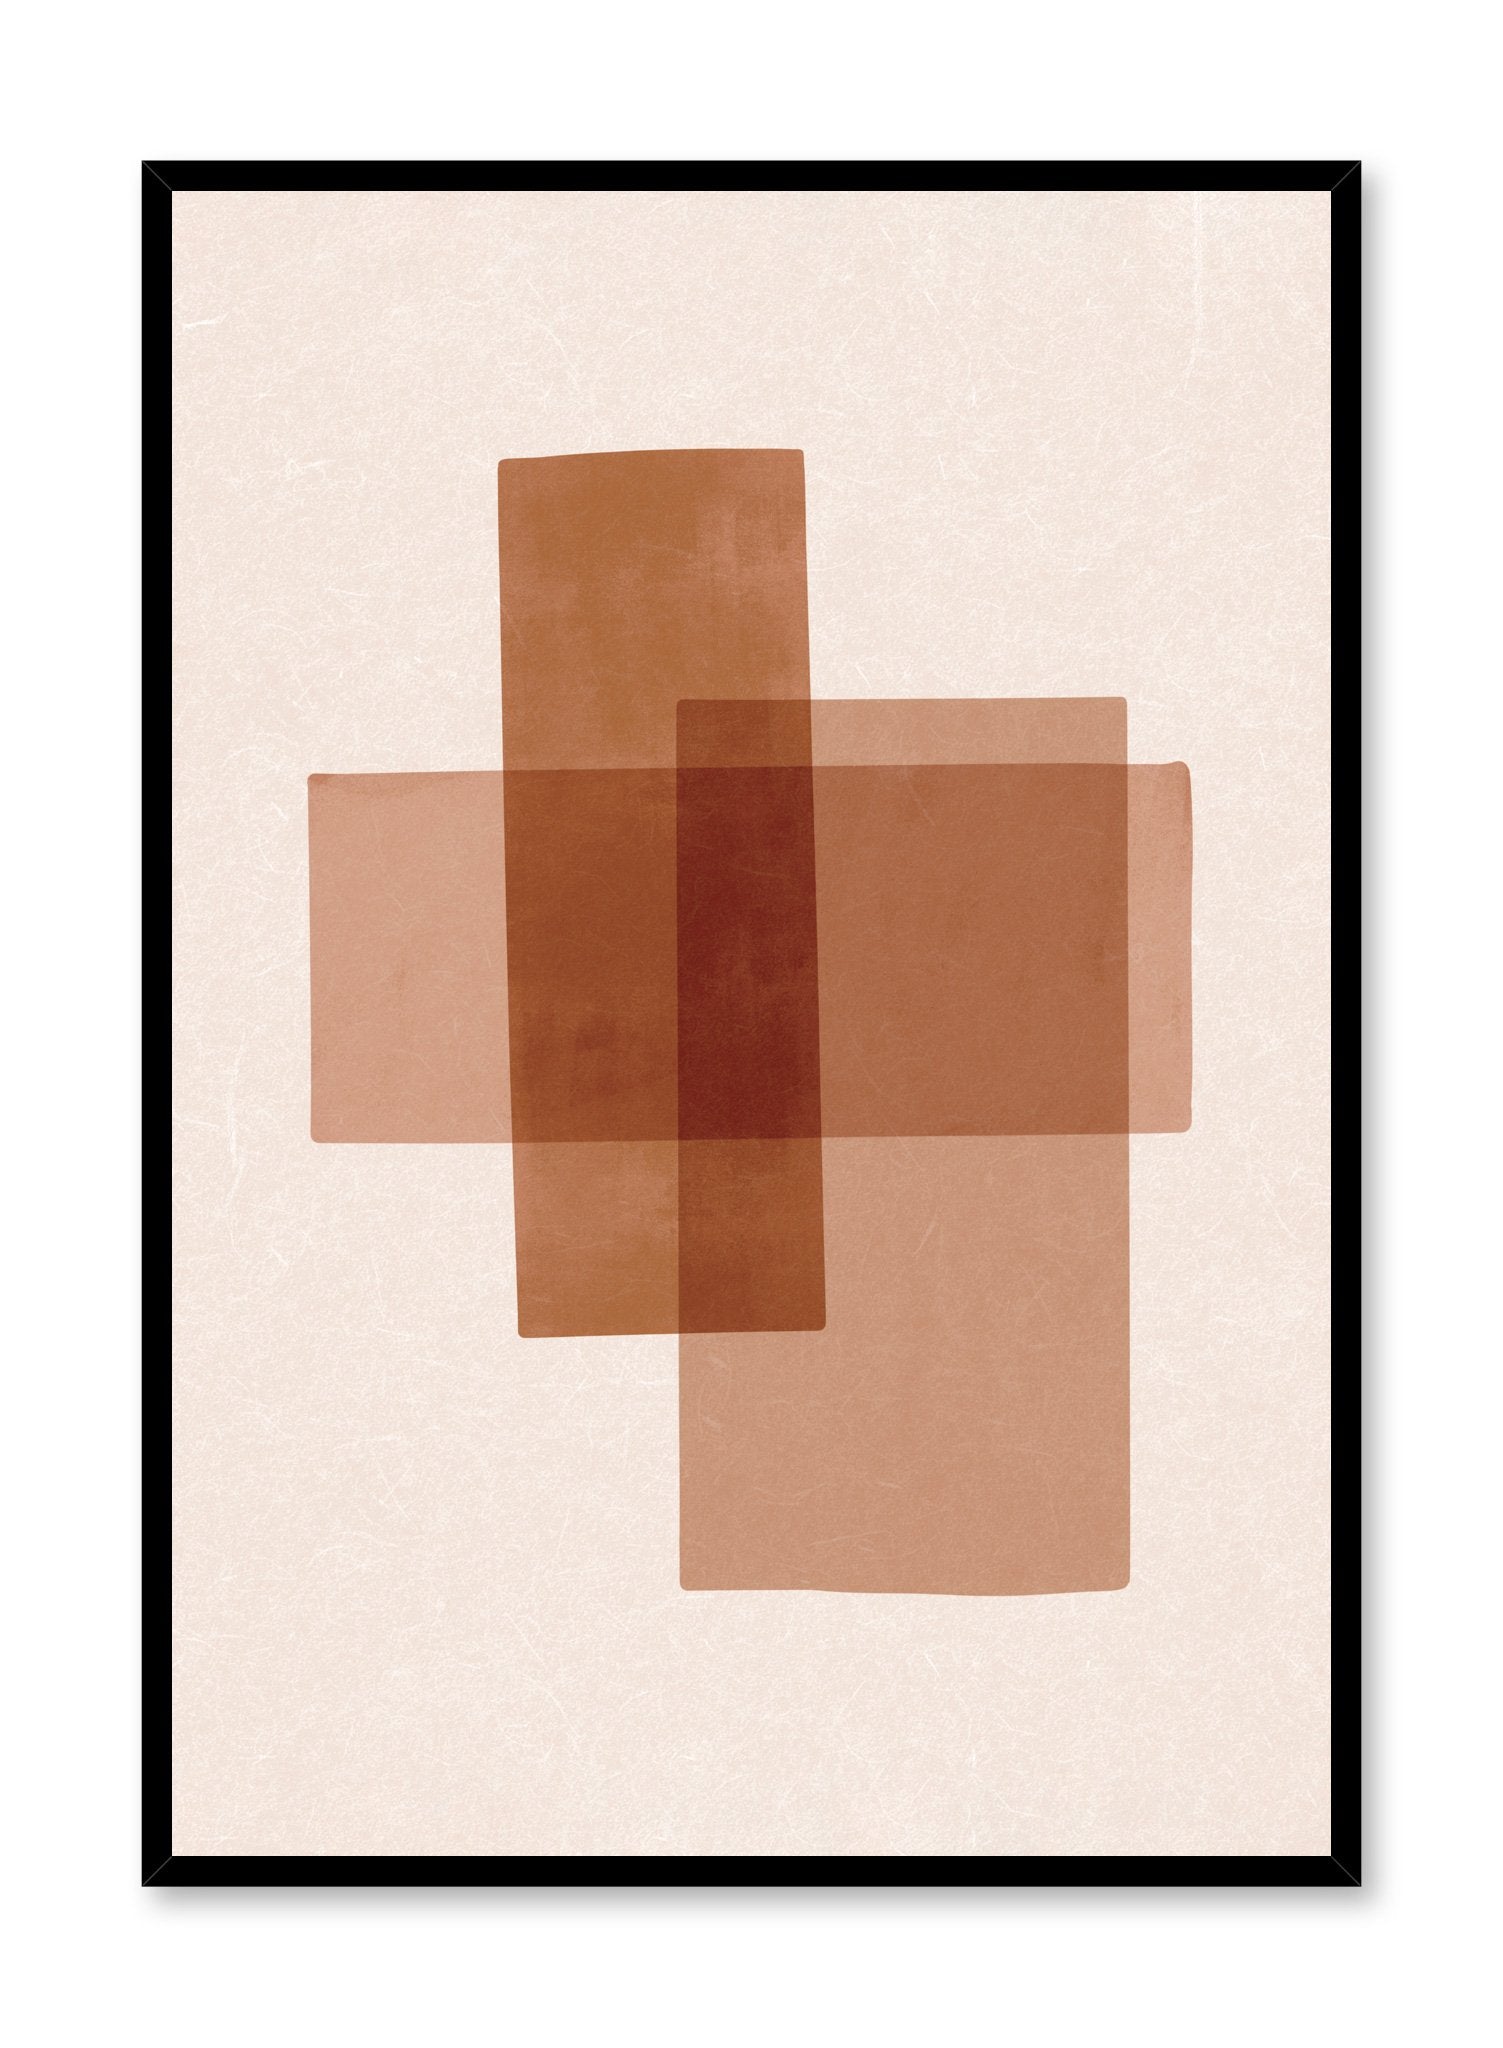 Modern abstract poster by Opposite Wall with overlapping rectangles in brown by Toffie Affichiste